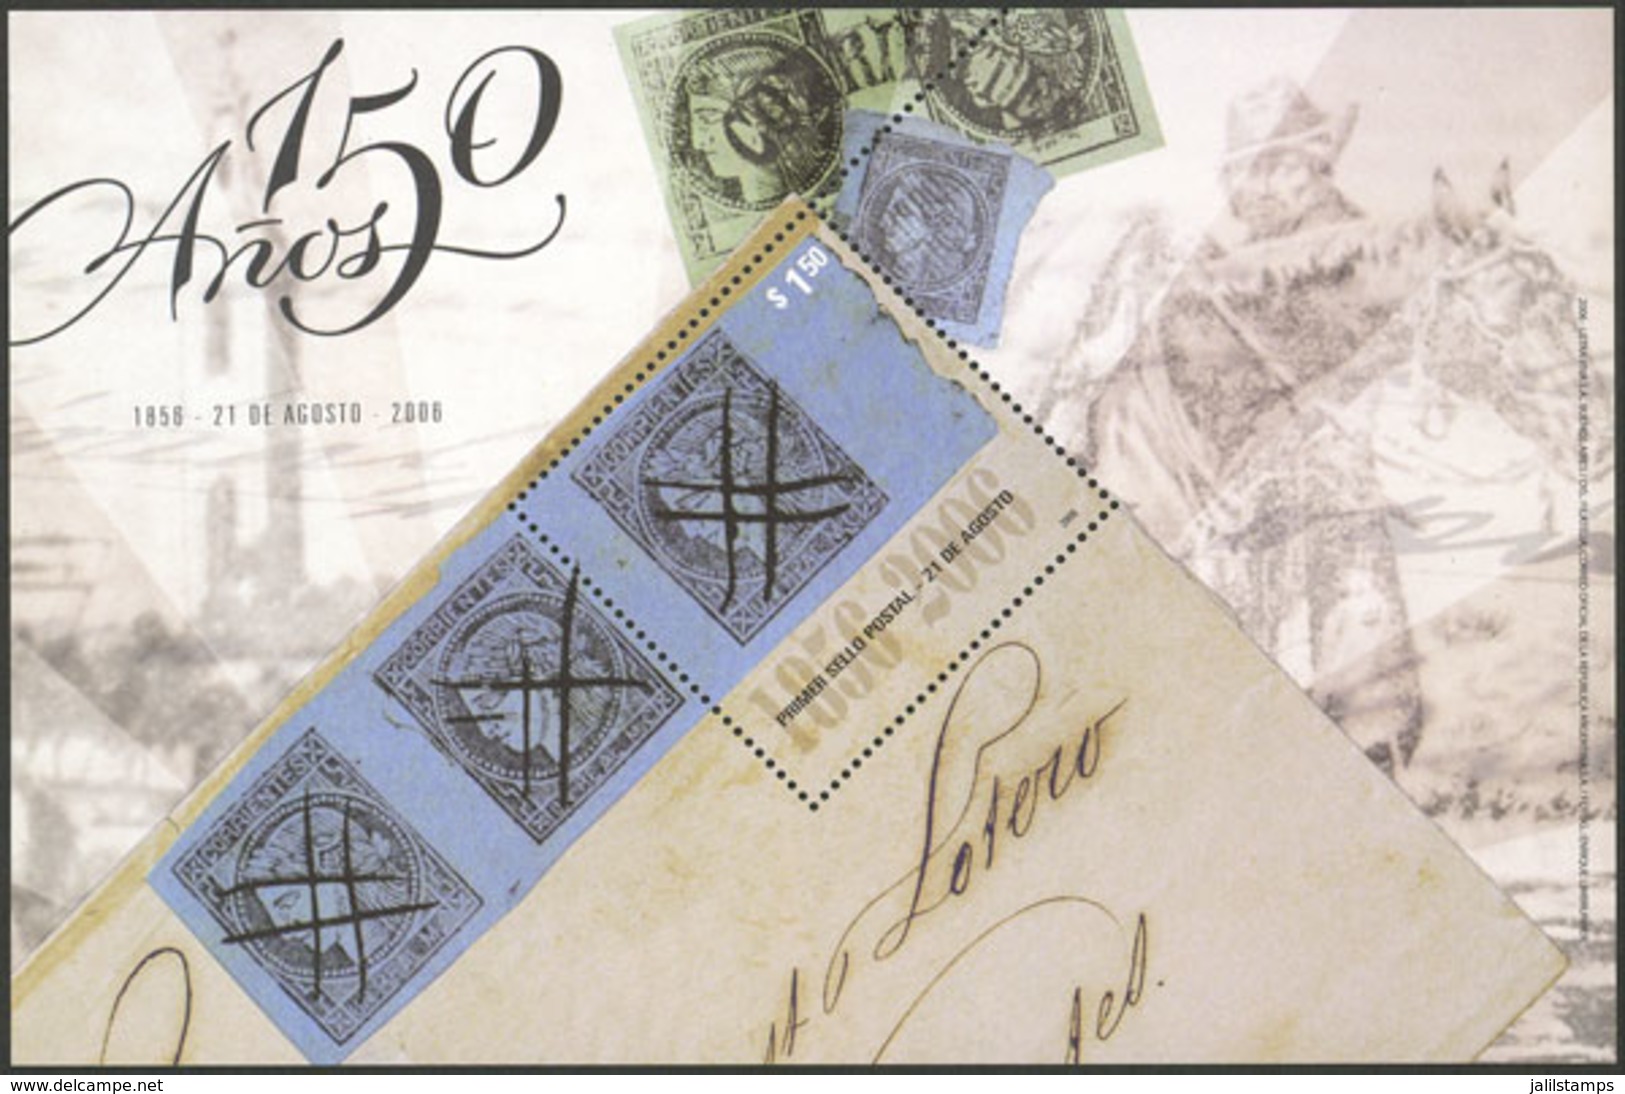 ARGENTINA: GJ.HB 175a, 2006 Corrientes Stamp 150th Anniversary, S.sheet With SILVER COLOR OMITTED Variety (without REPUB - Hojas Bloque